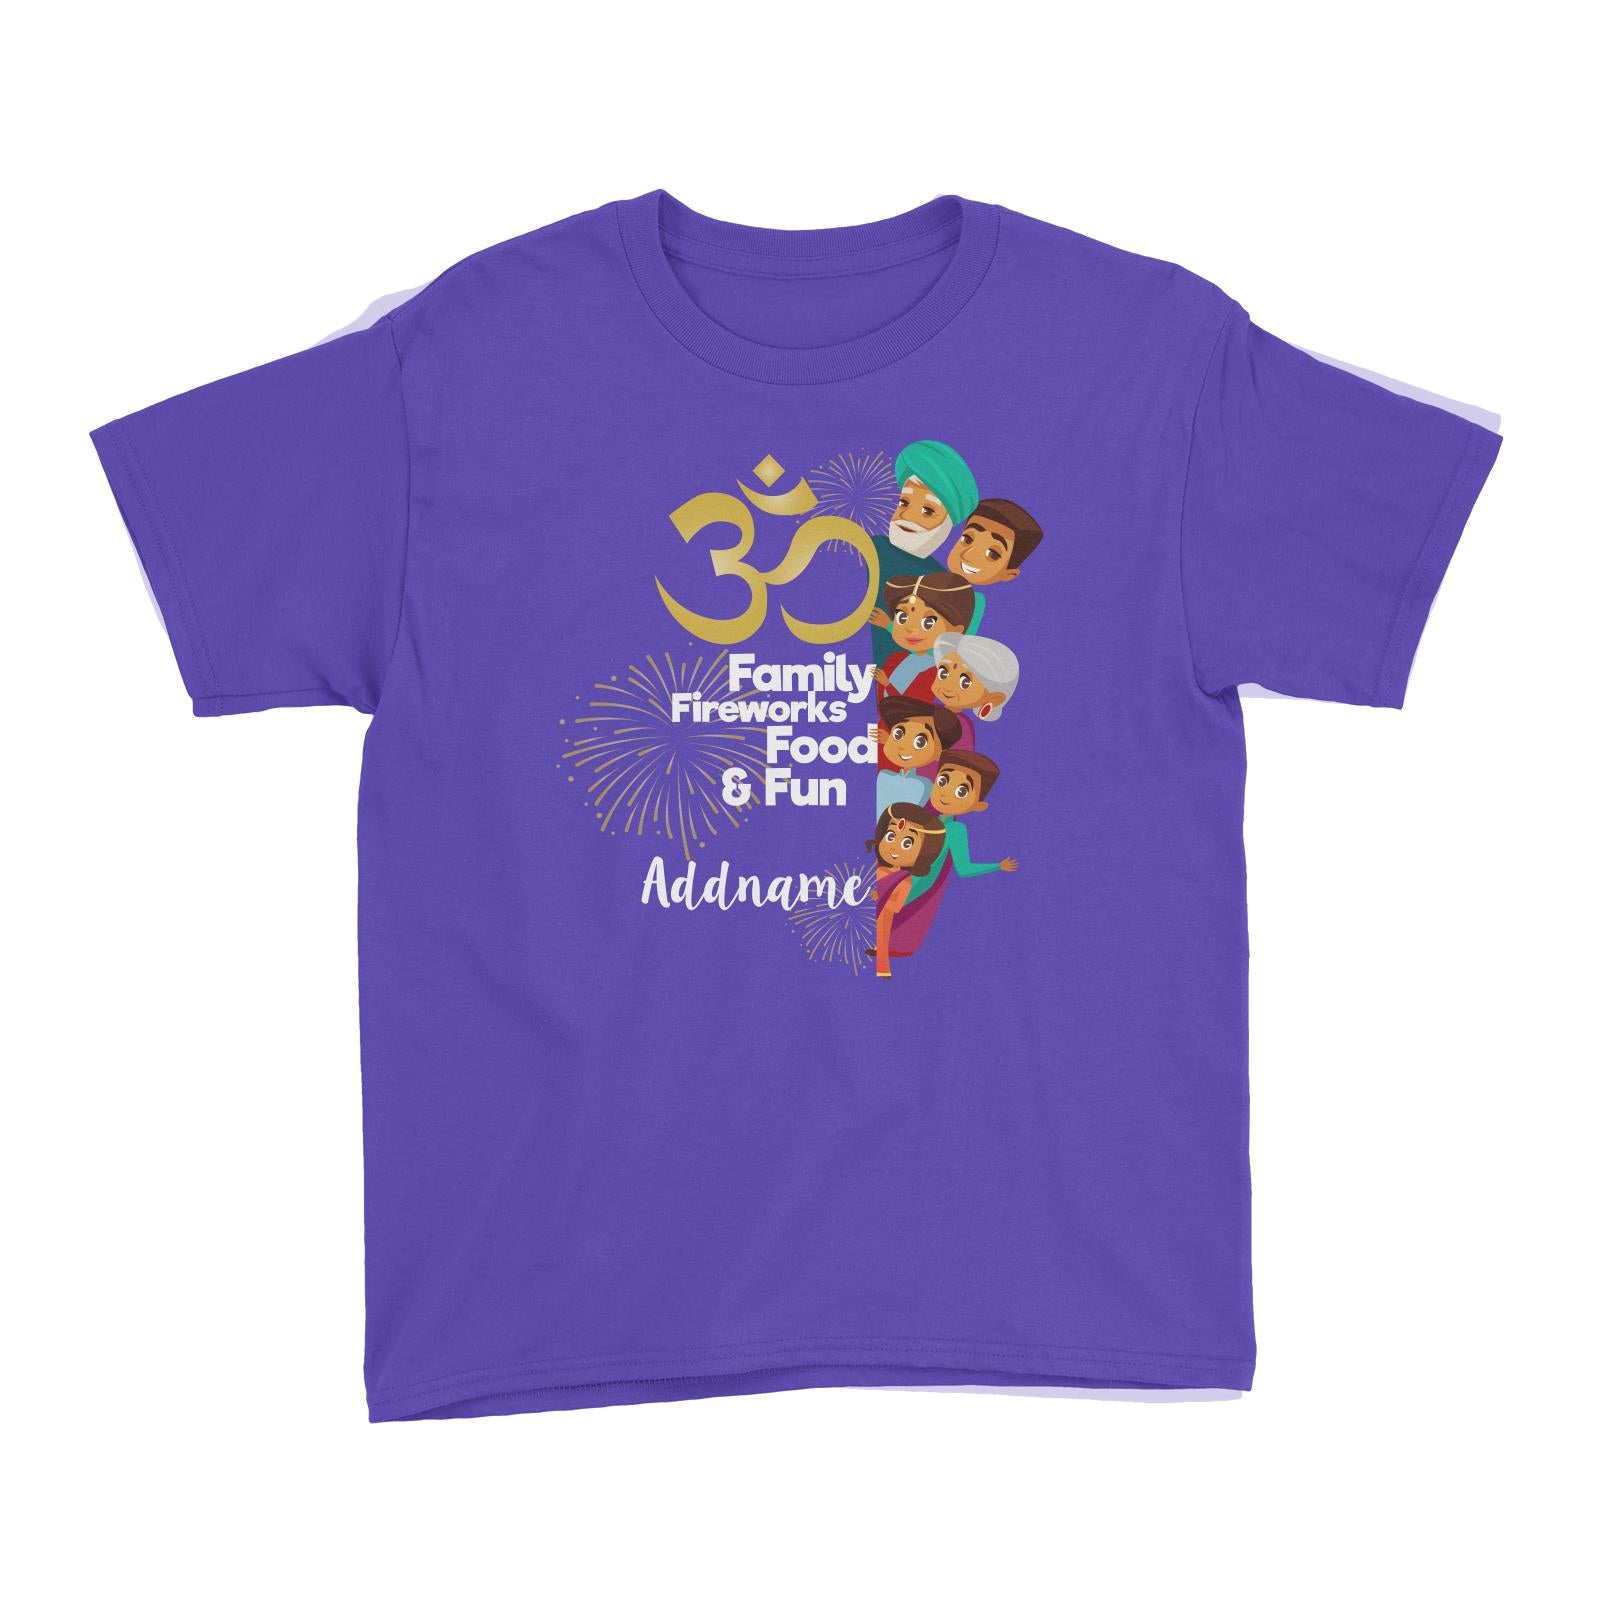 Cute Family OM Family Fireworks Food and Fun Addname Kid's T-Shirt